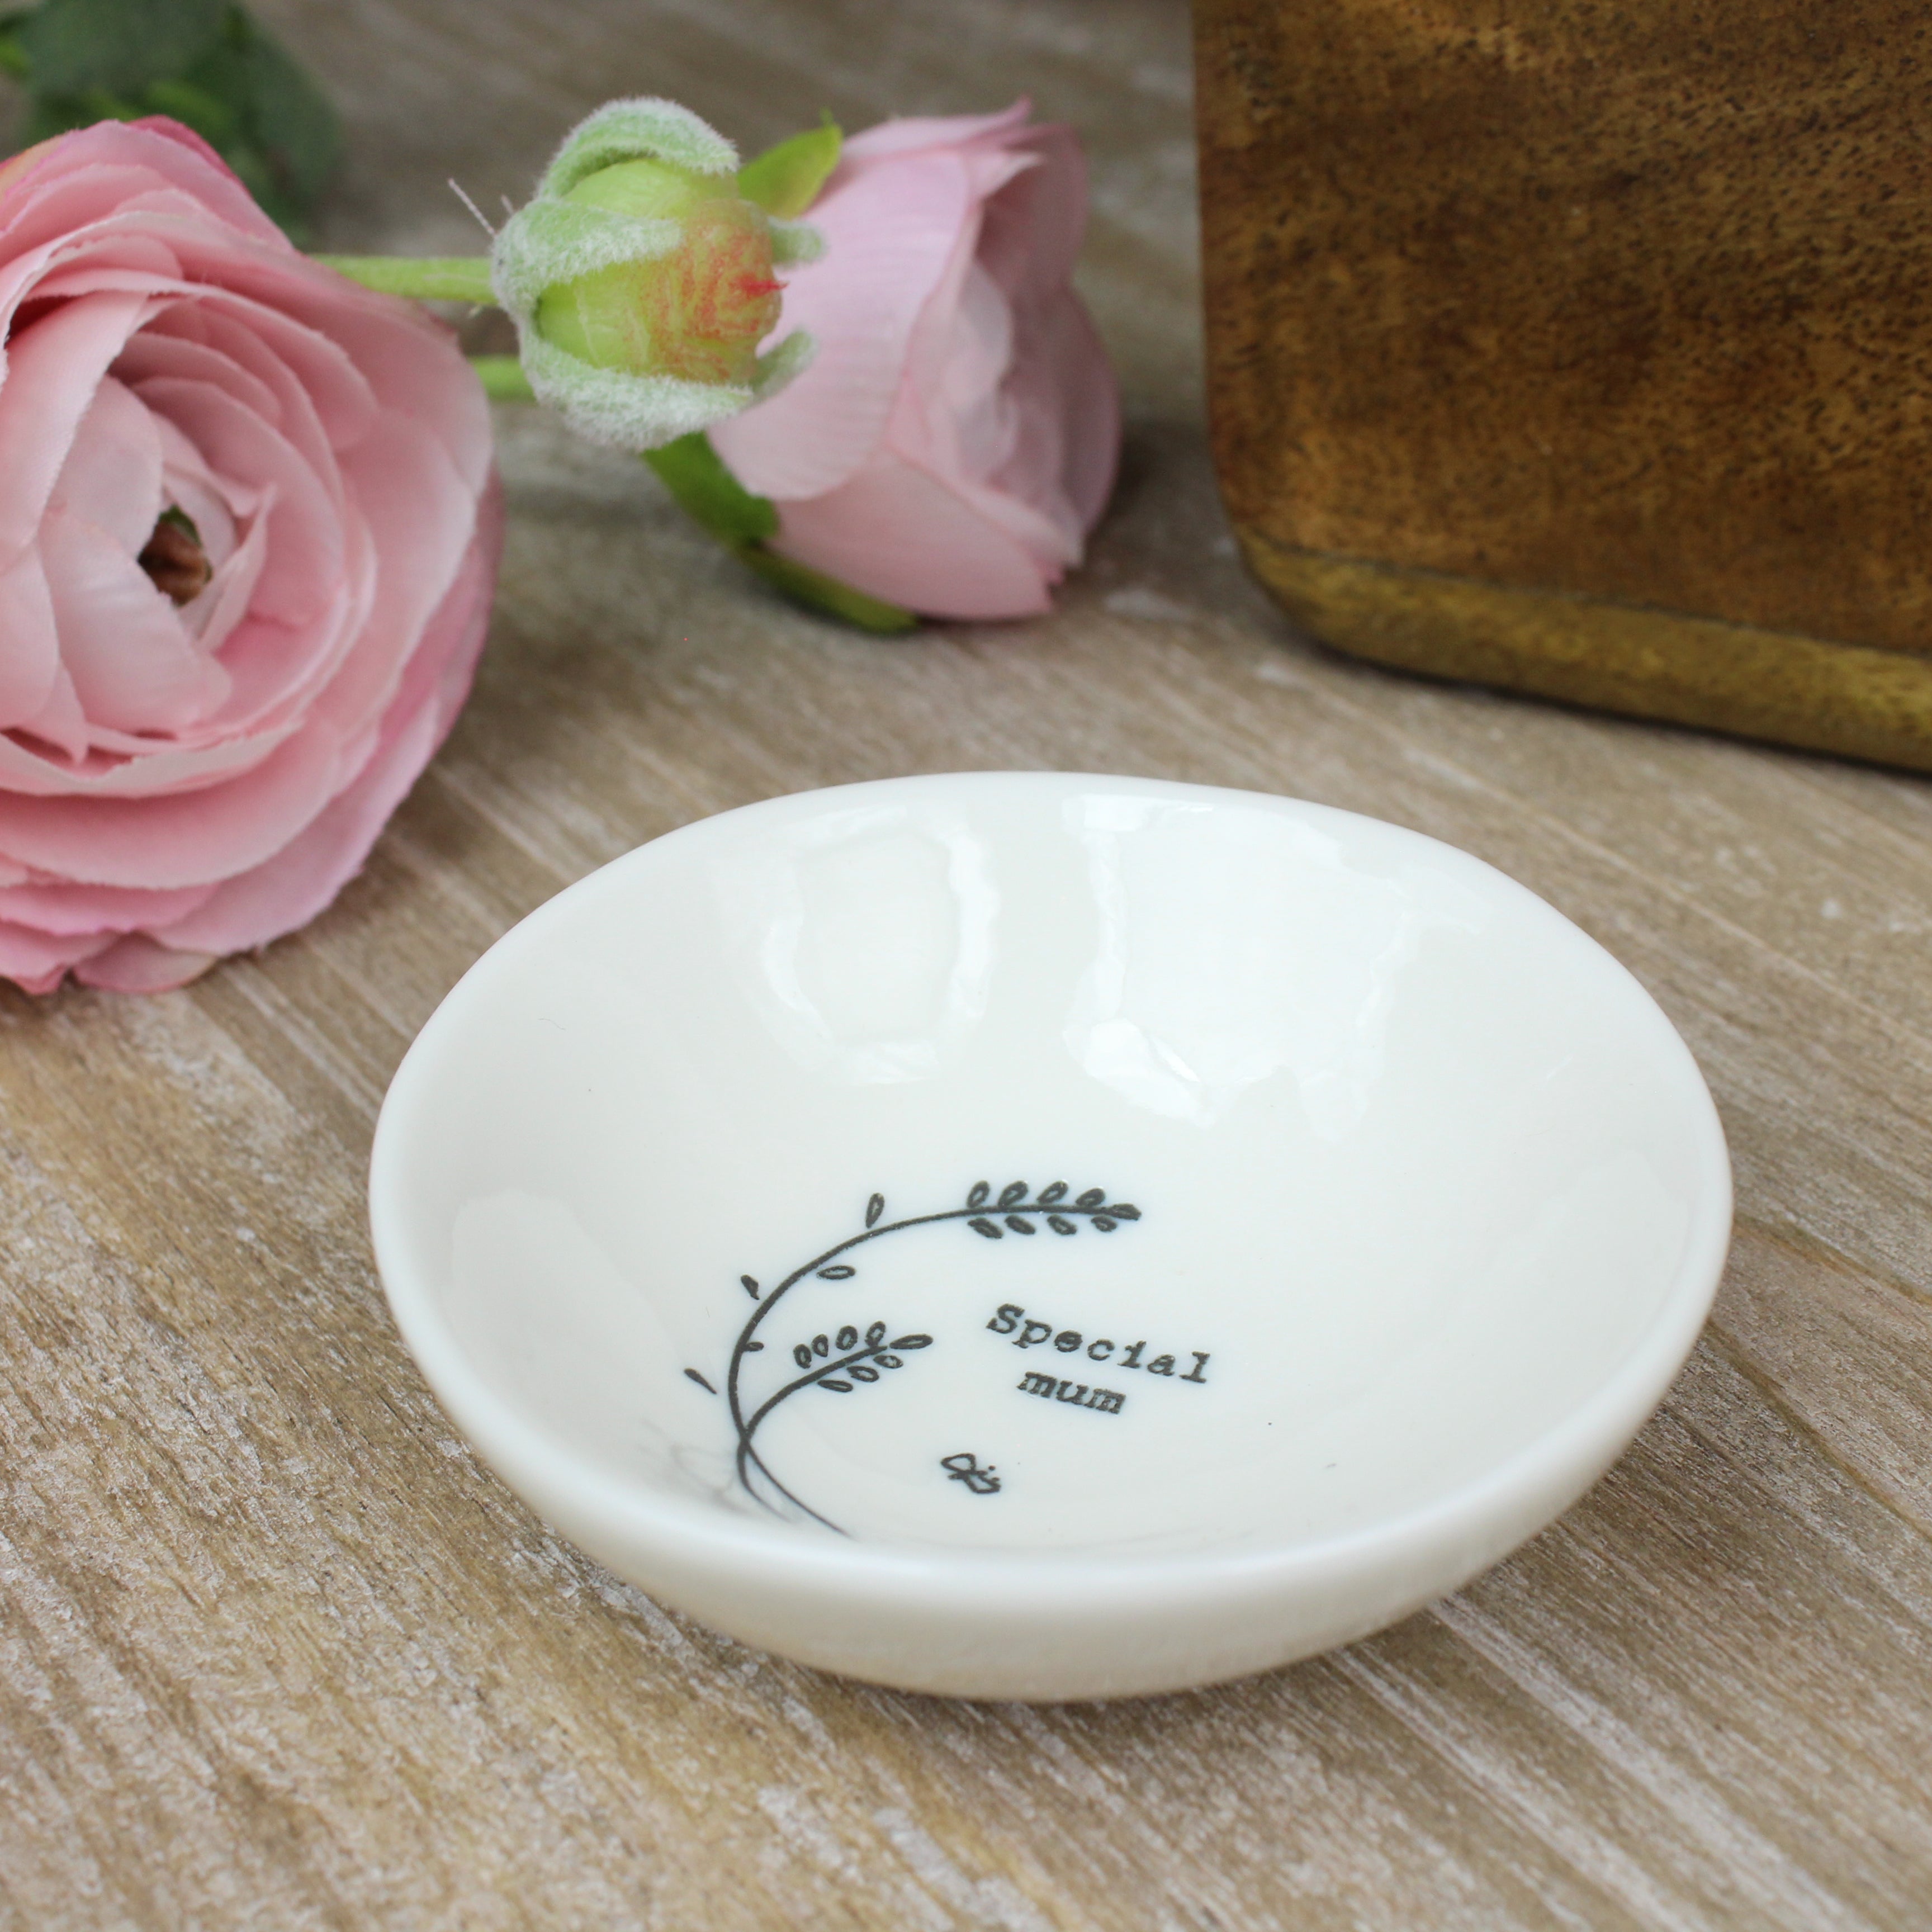 East Of India Special Mum Small Hedgerow Bowl